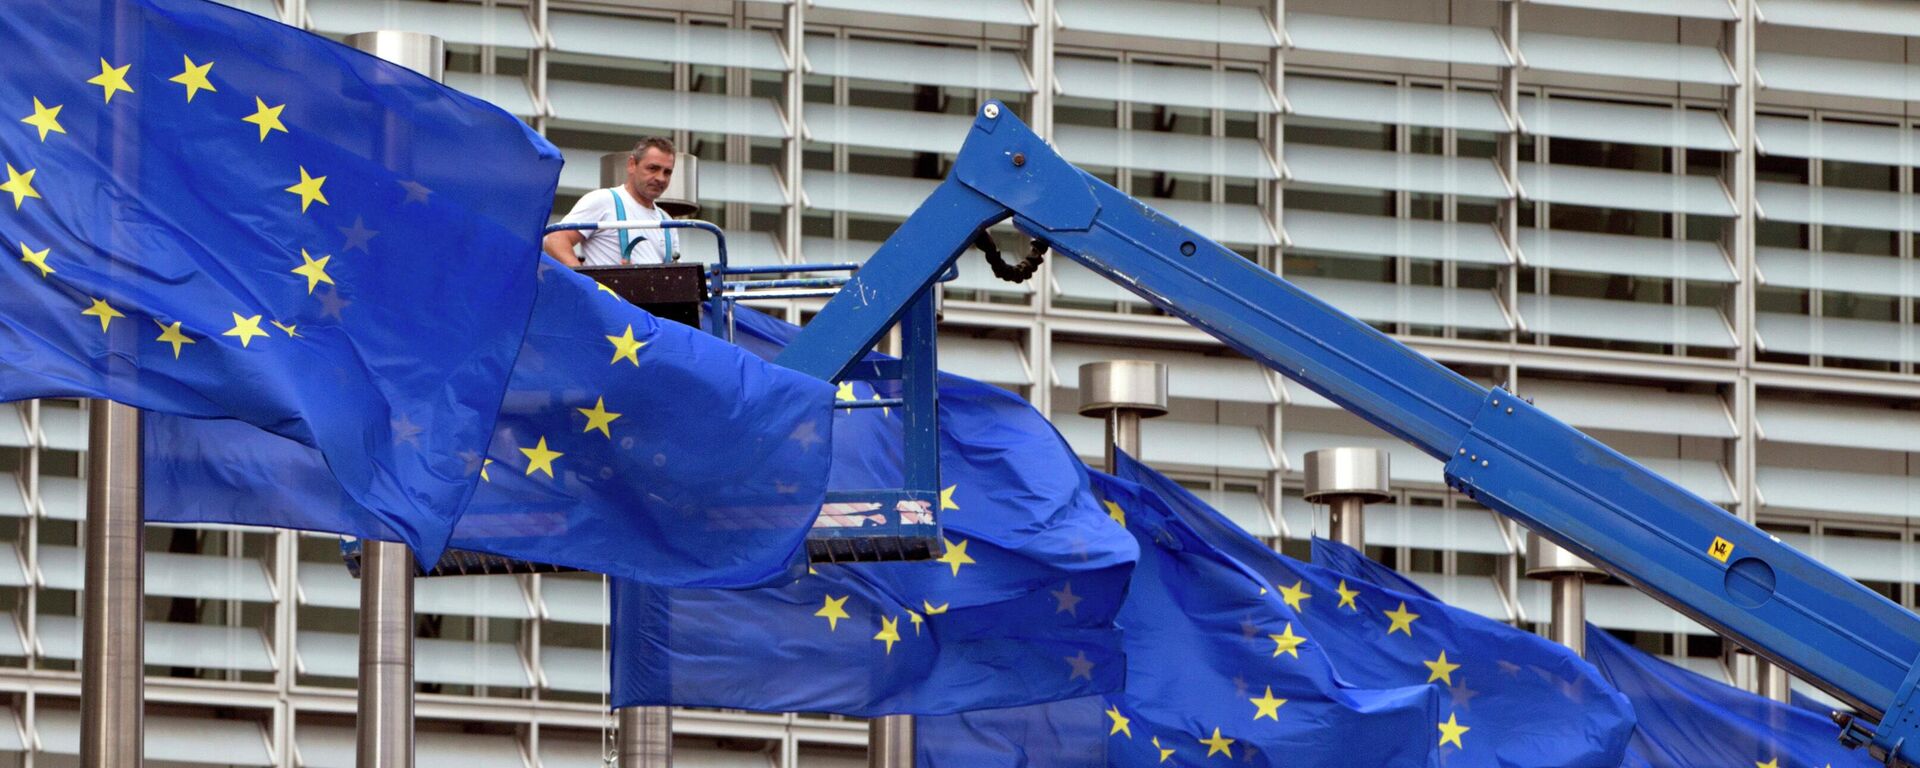 FILE- In this June 23, 2016 file photo, a worker on a lift adjusts the EU flags in front of EU headquarters in Brussels - Sputnik International, 1920, 17.02.2024